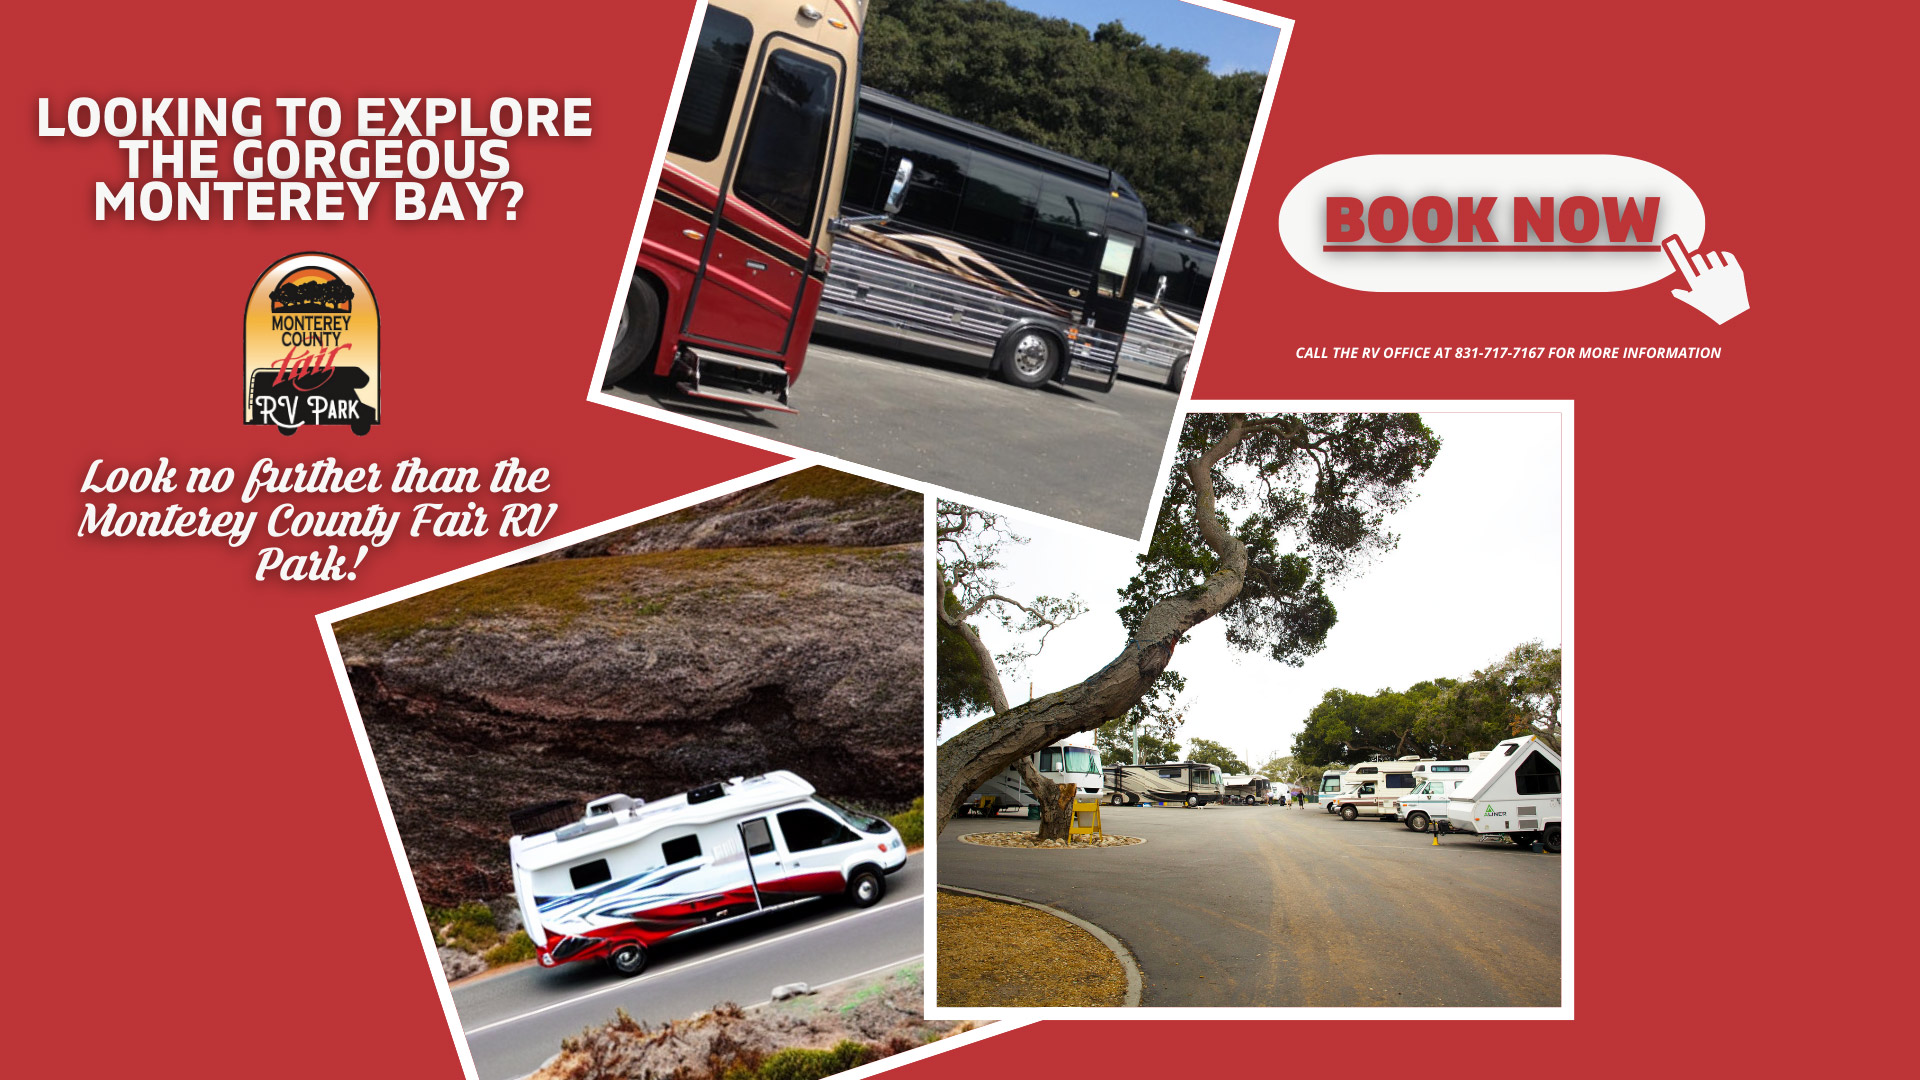 Looking to explore the gorgeous Monterey Bay? Look No further than Monterey RV Park. Click here to book